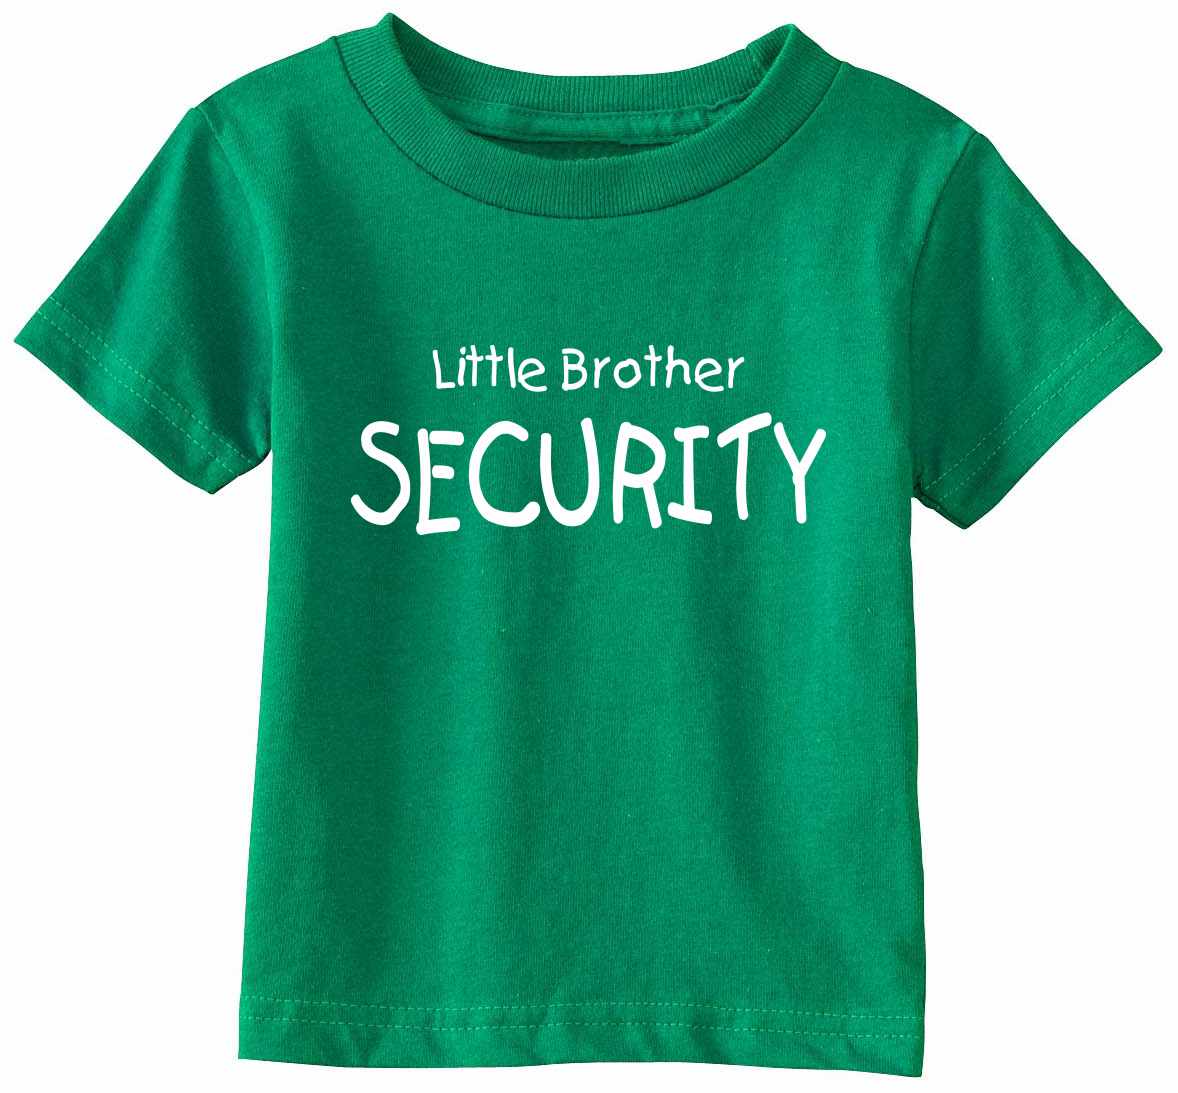 Little Brother Security Infant/Toddler 